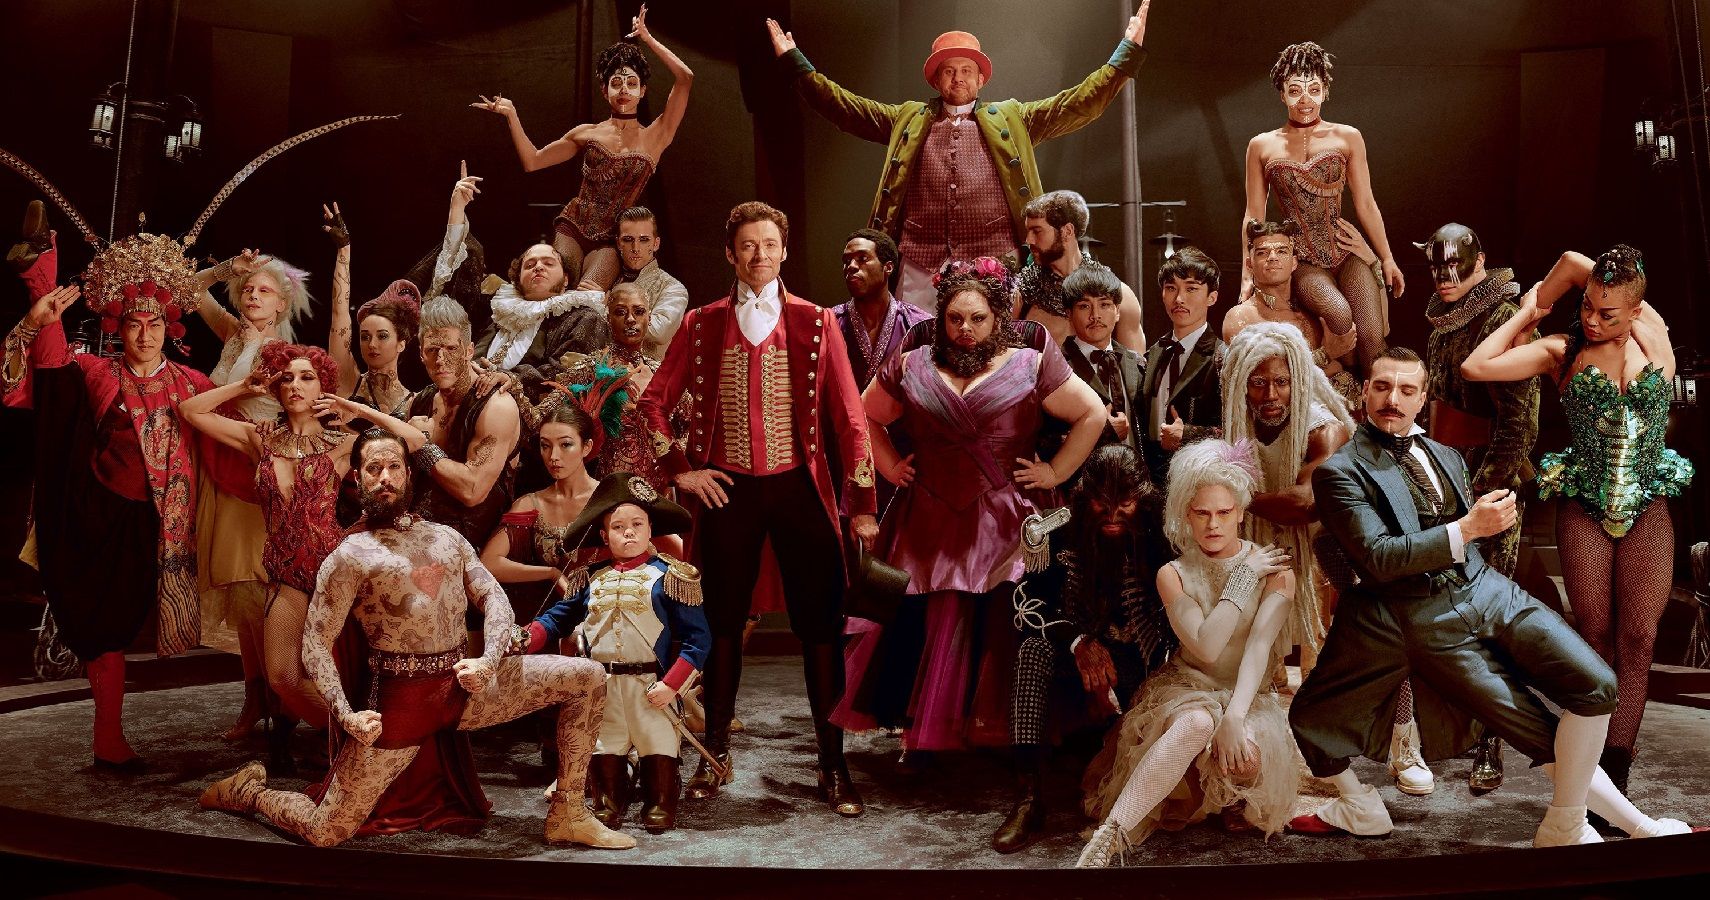 Greatest Showman True Story: Biggest Changes To The Real P. T. Barnum